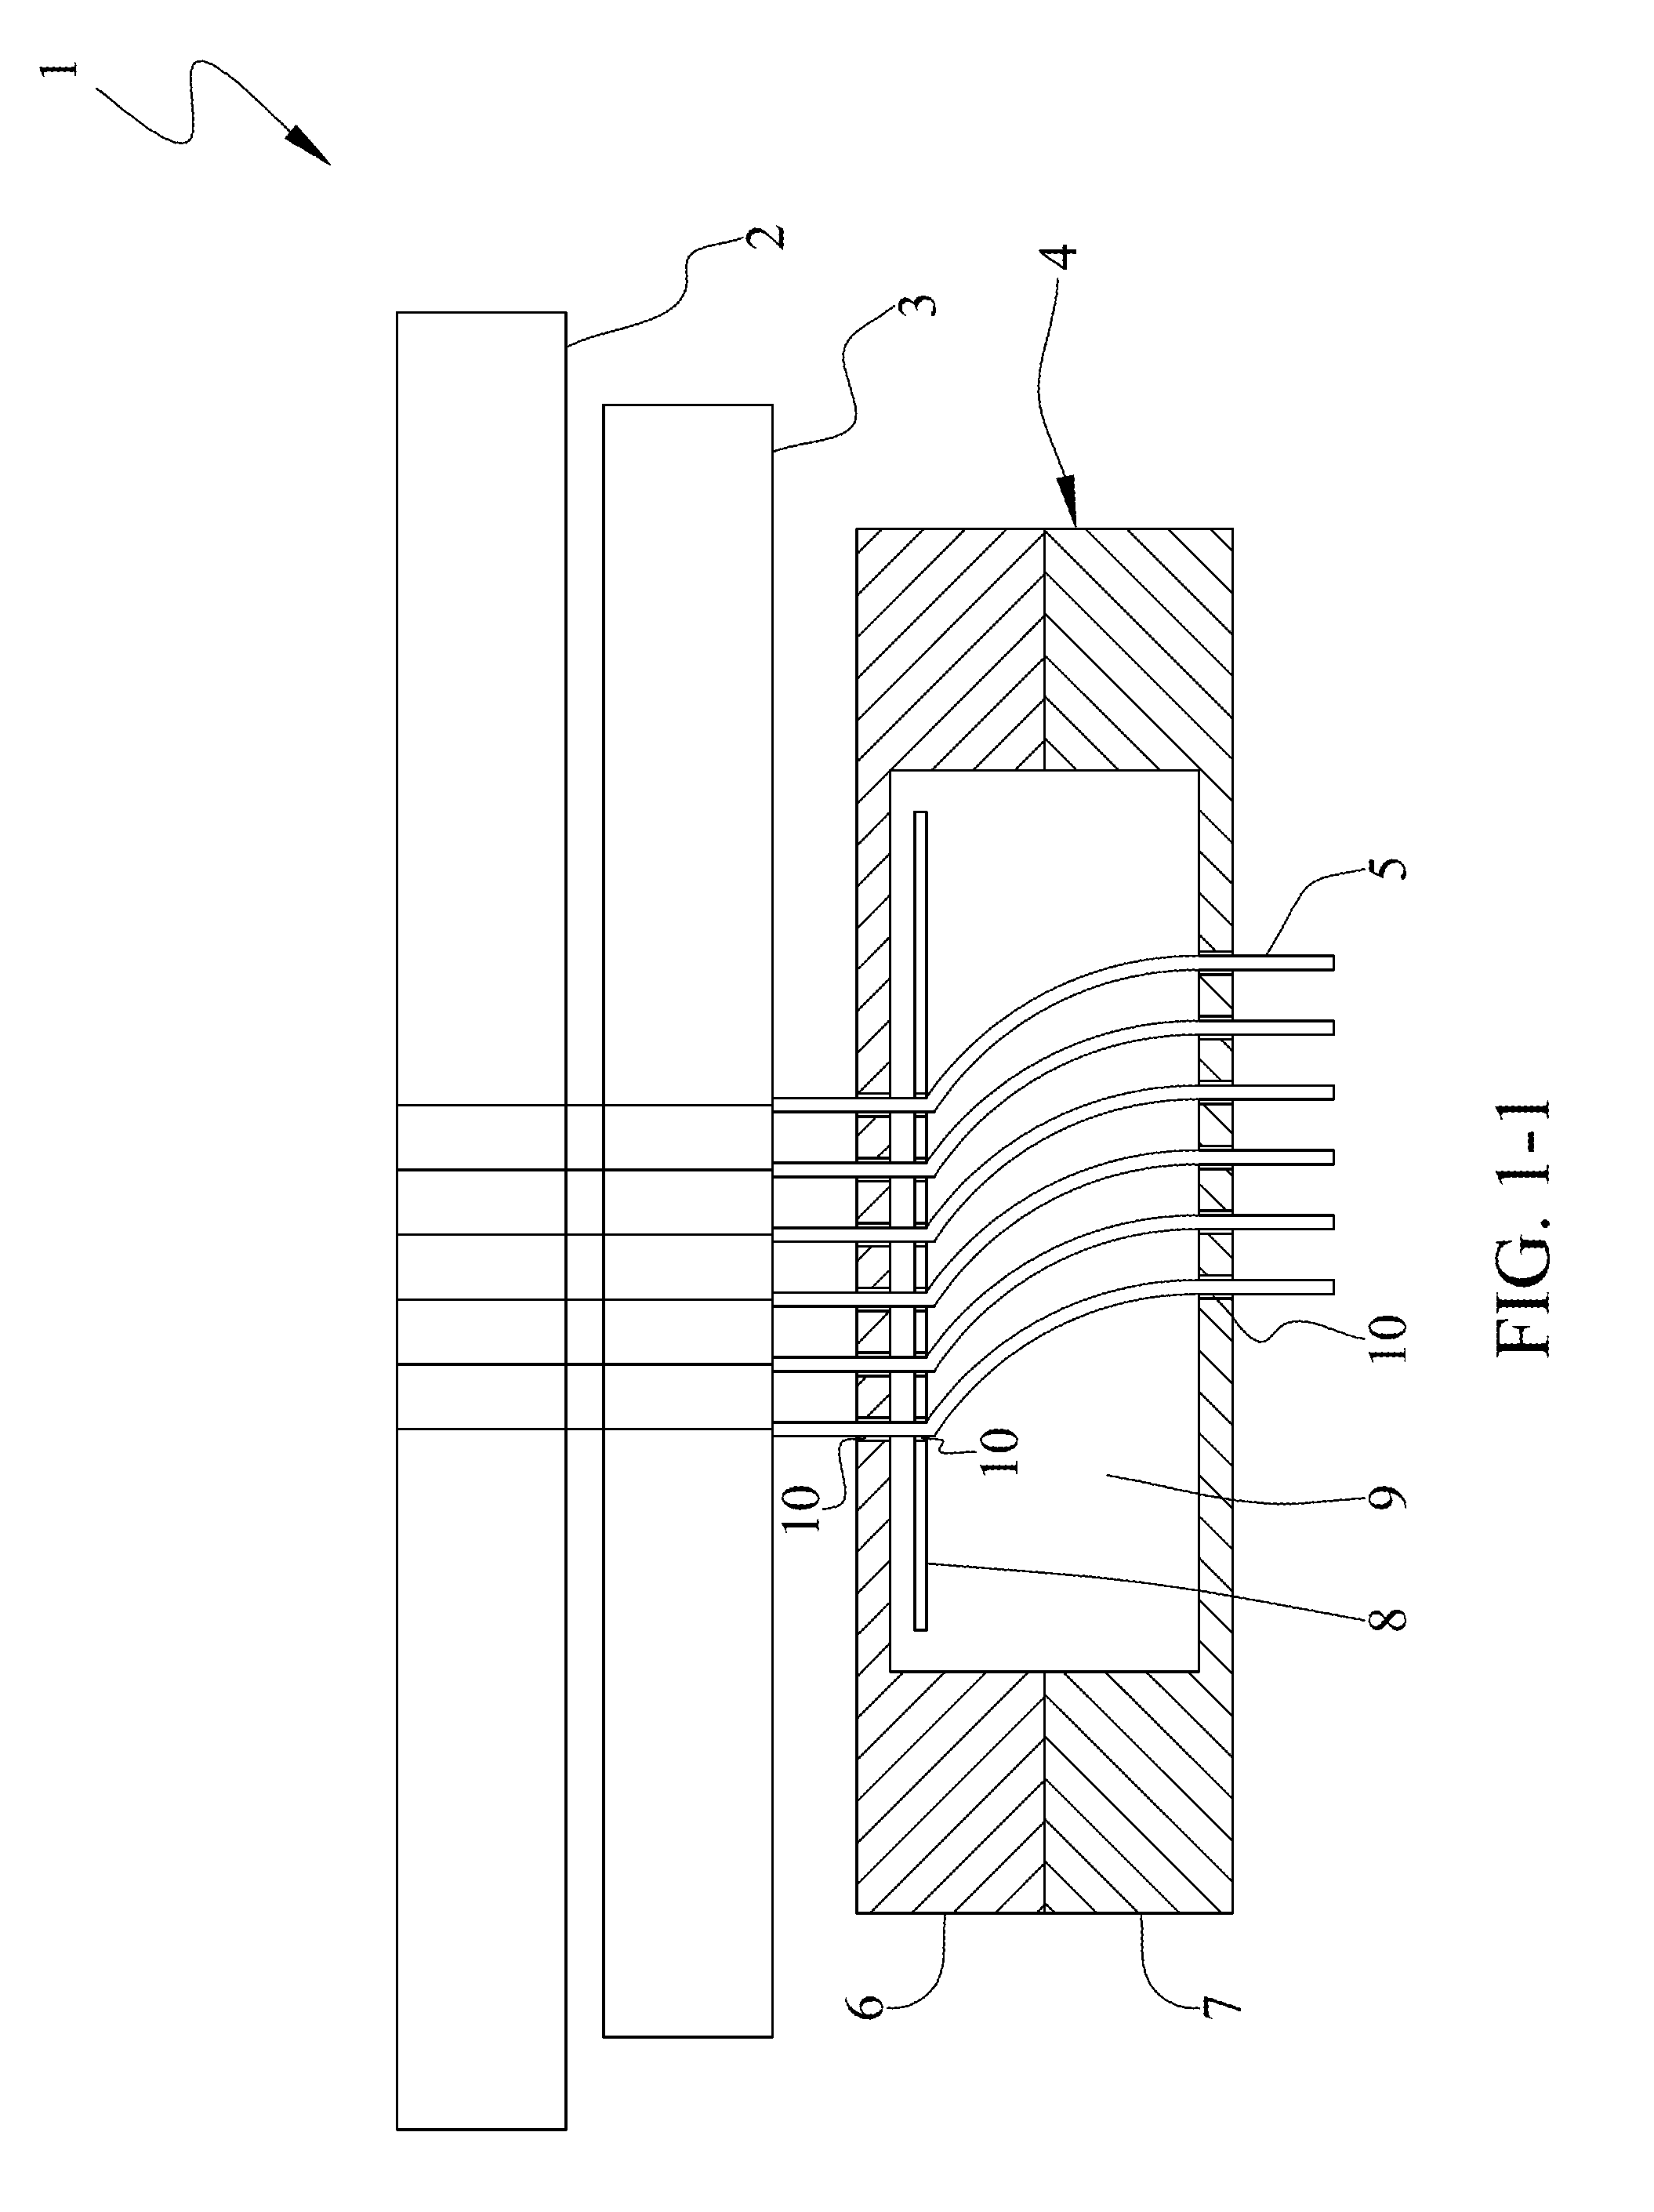 Combined probe head for a vertical probe card and method for assembling and aligning the combined probe head thereof